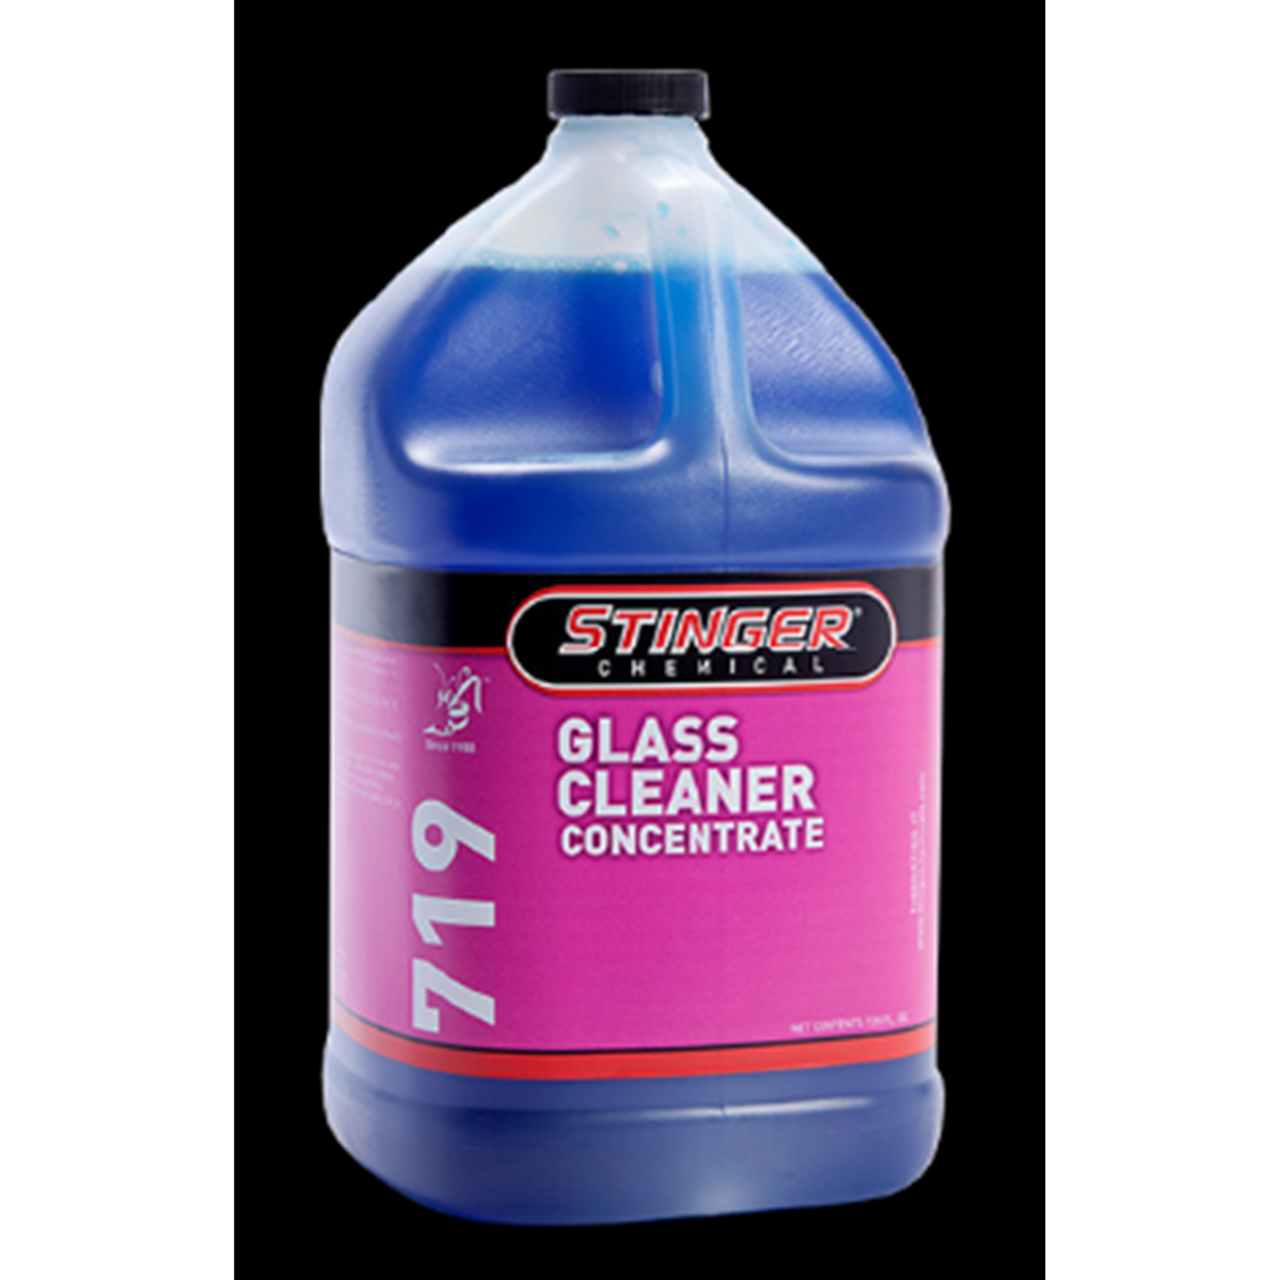 Stinger Glass Cleaner Concentrate 719